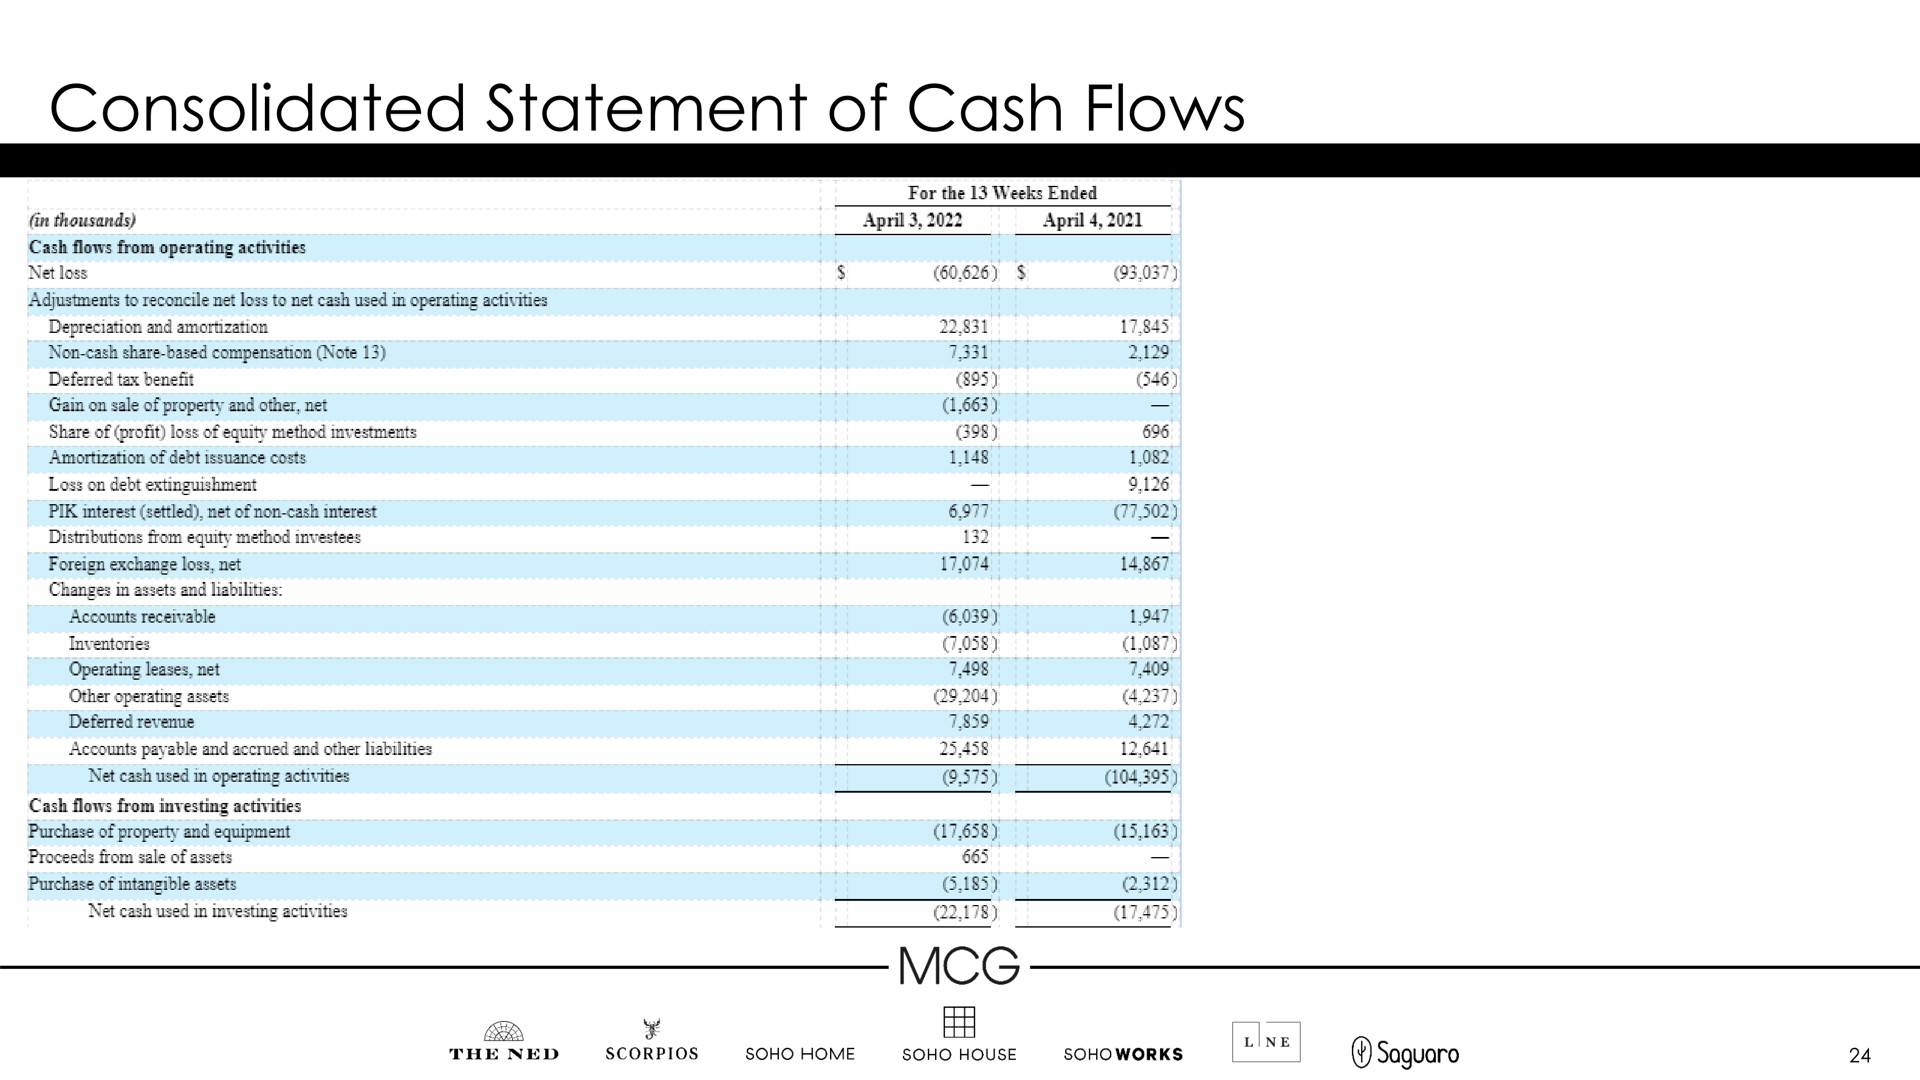 consolidated statement of cash flows ree file | Membership Collective Group